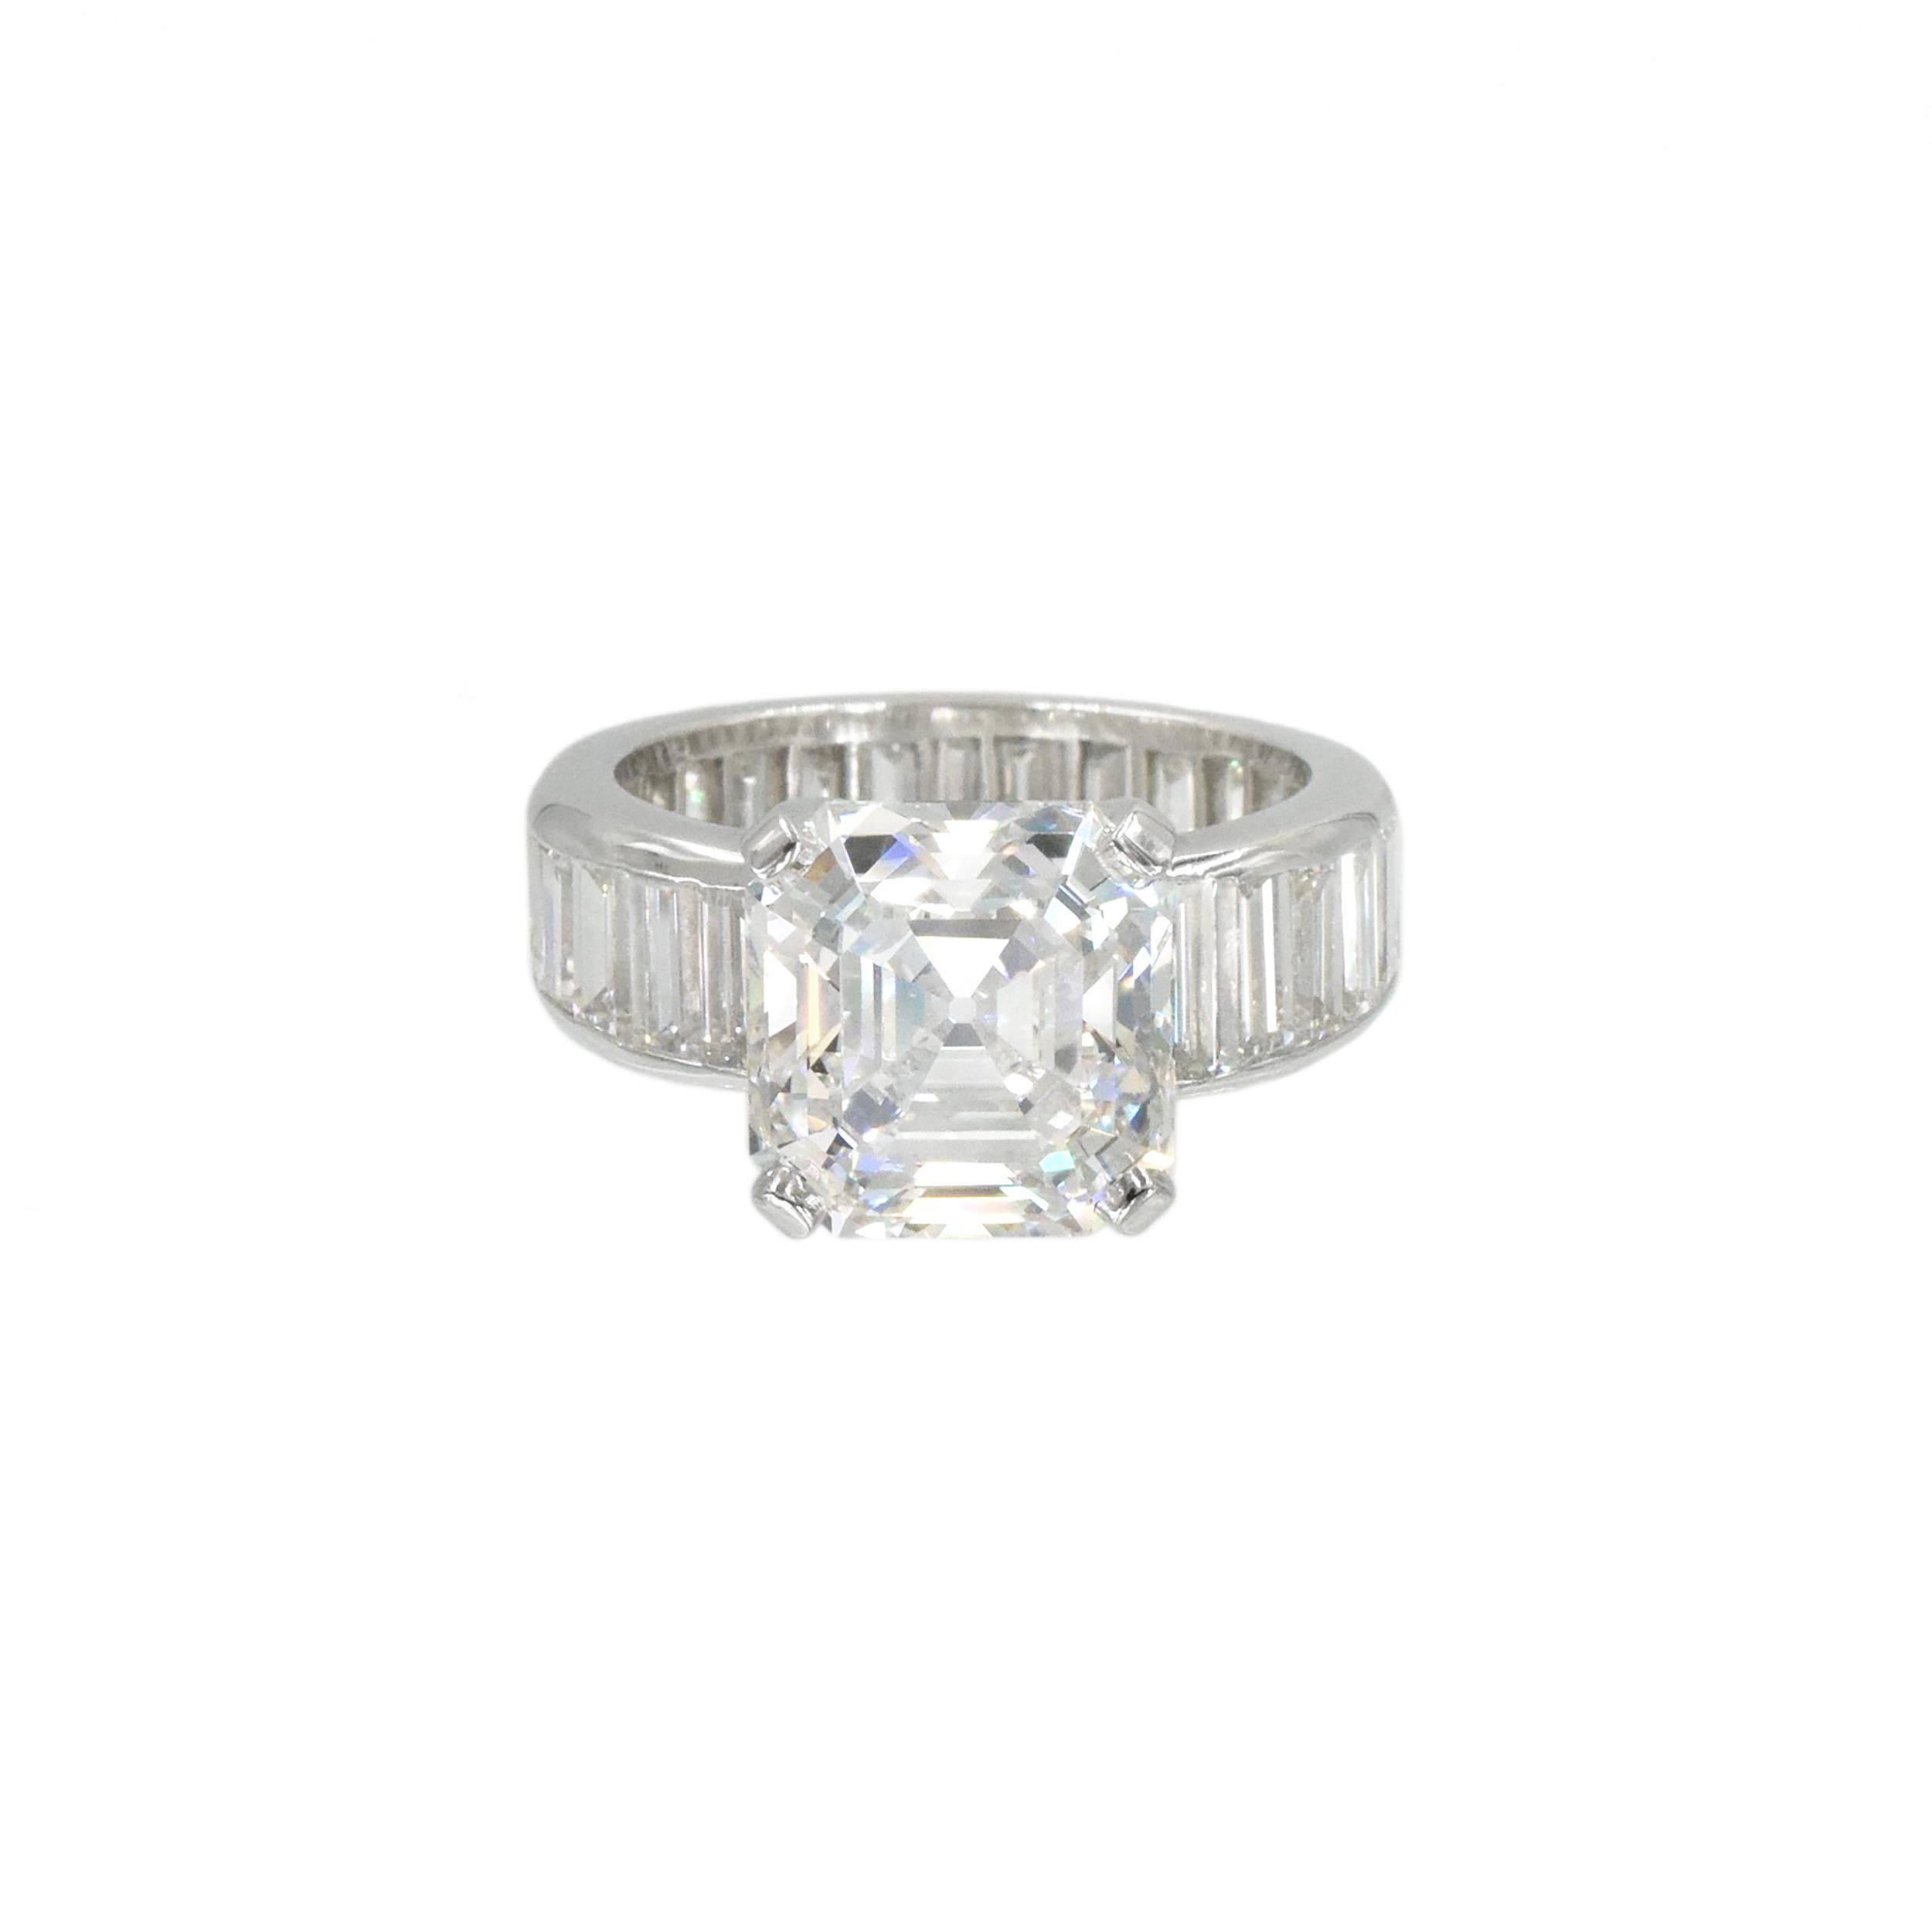 Classic Harry Winston solitaire ring  with a  G.I.A. certified asscher cut center diamond weighs 6.20 carts  Color: E, Clarity: VS1, GIA#6224444094, all set in platinum. This diamond mounting is channel set all the way around with 24 baguette cut